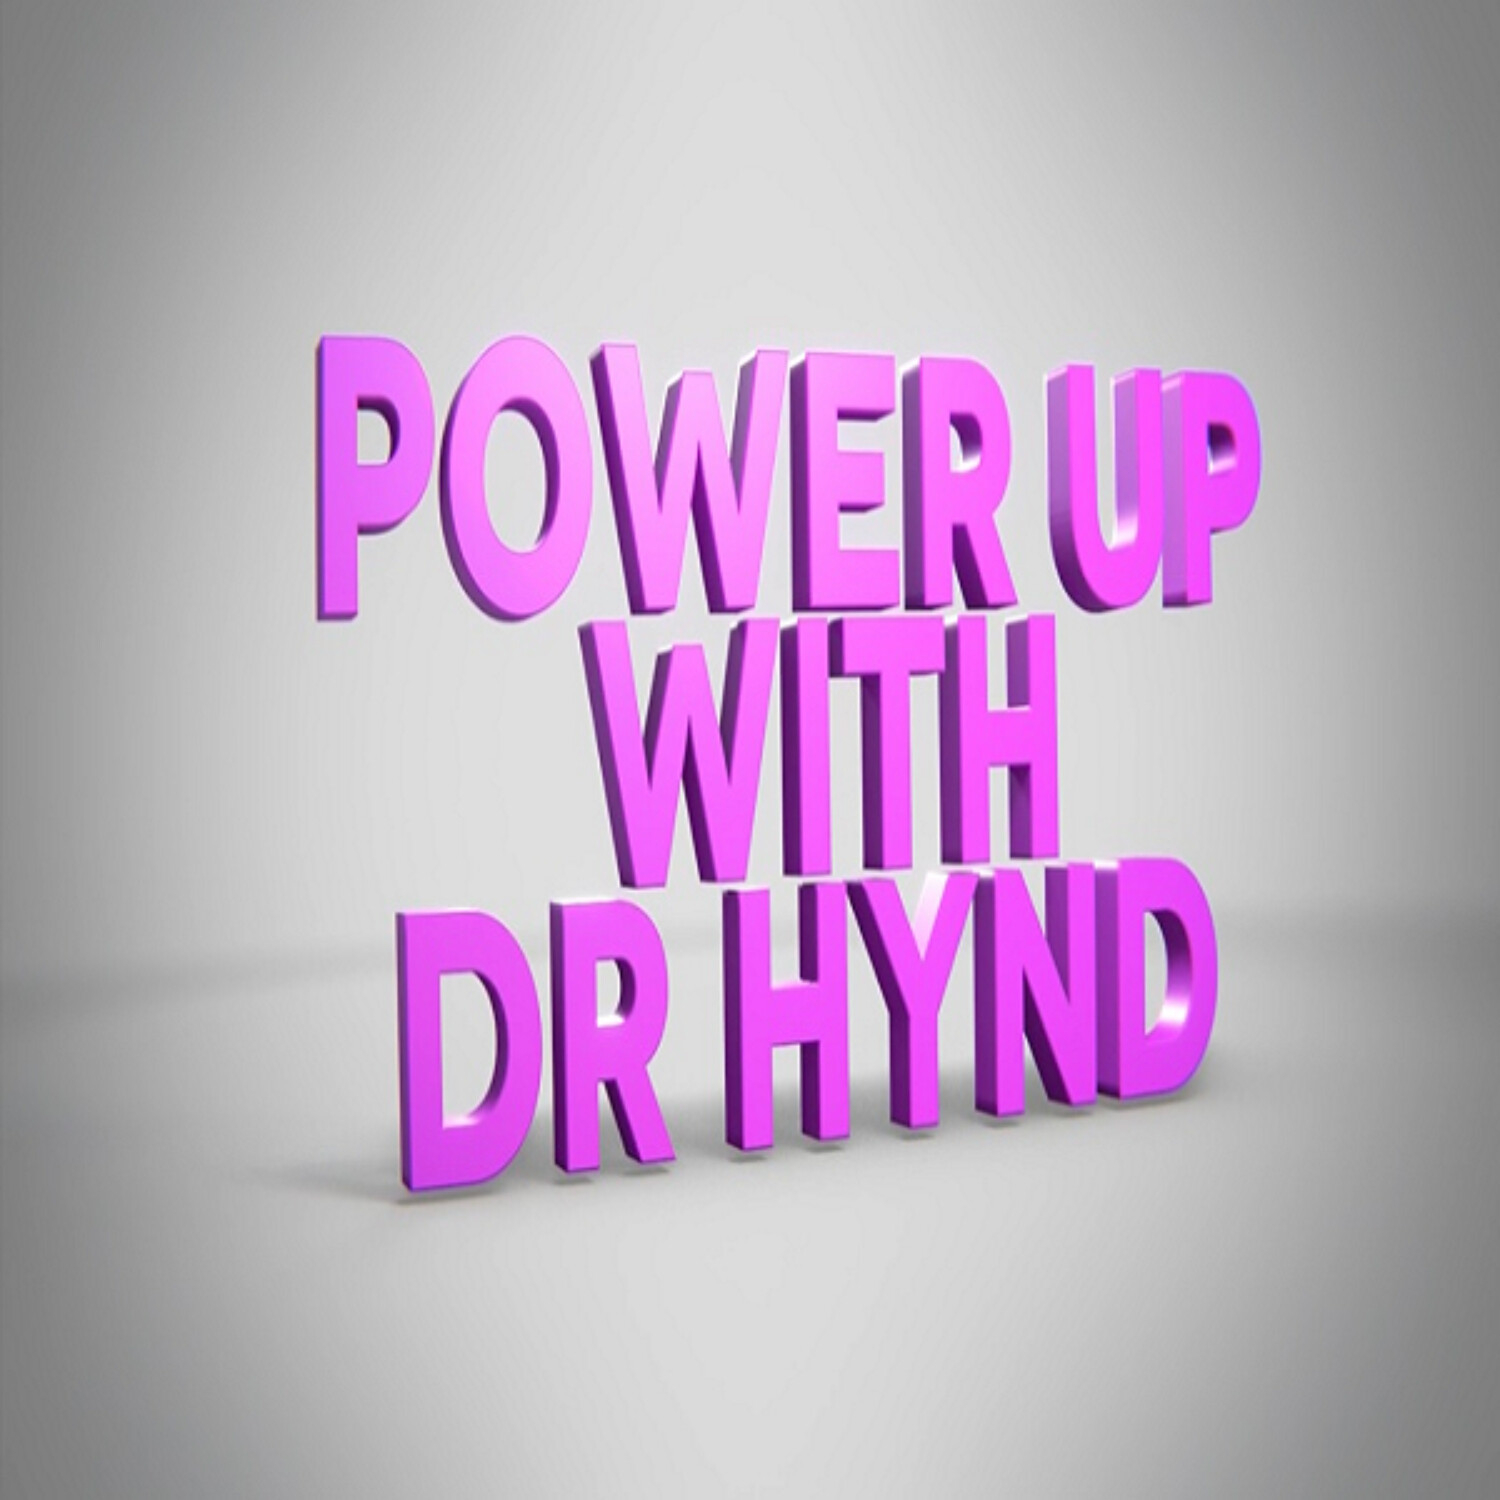 Women's Empowerment Series with Dr. Hynd and Dr. Ani about Health & Success